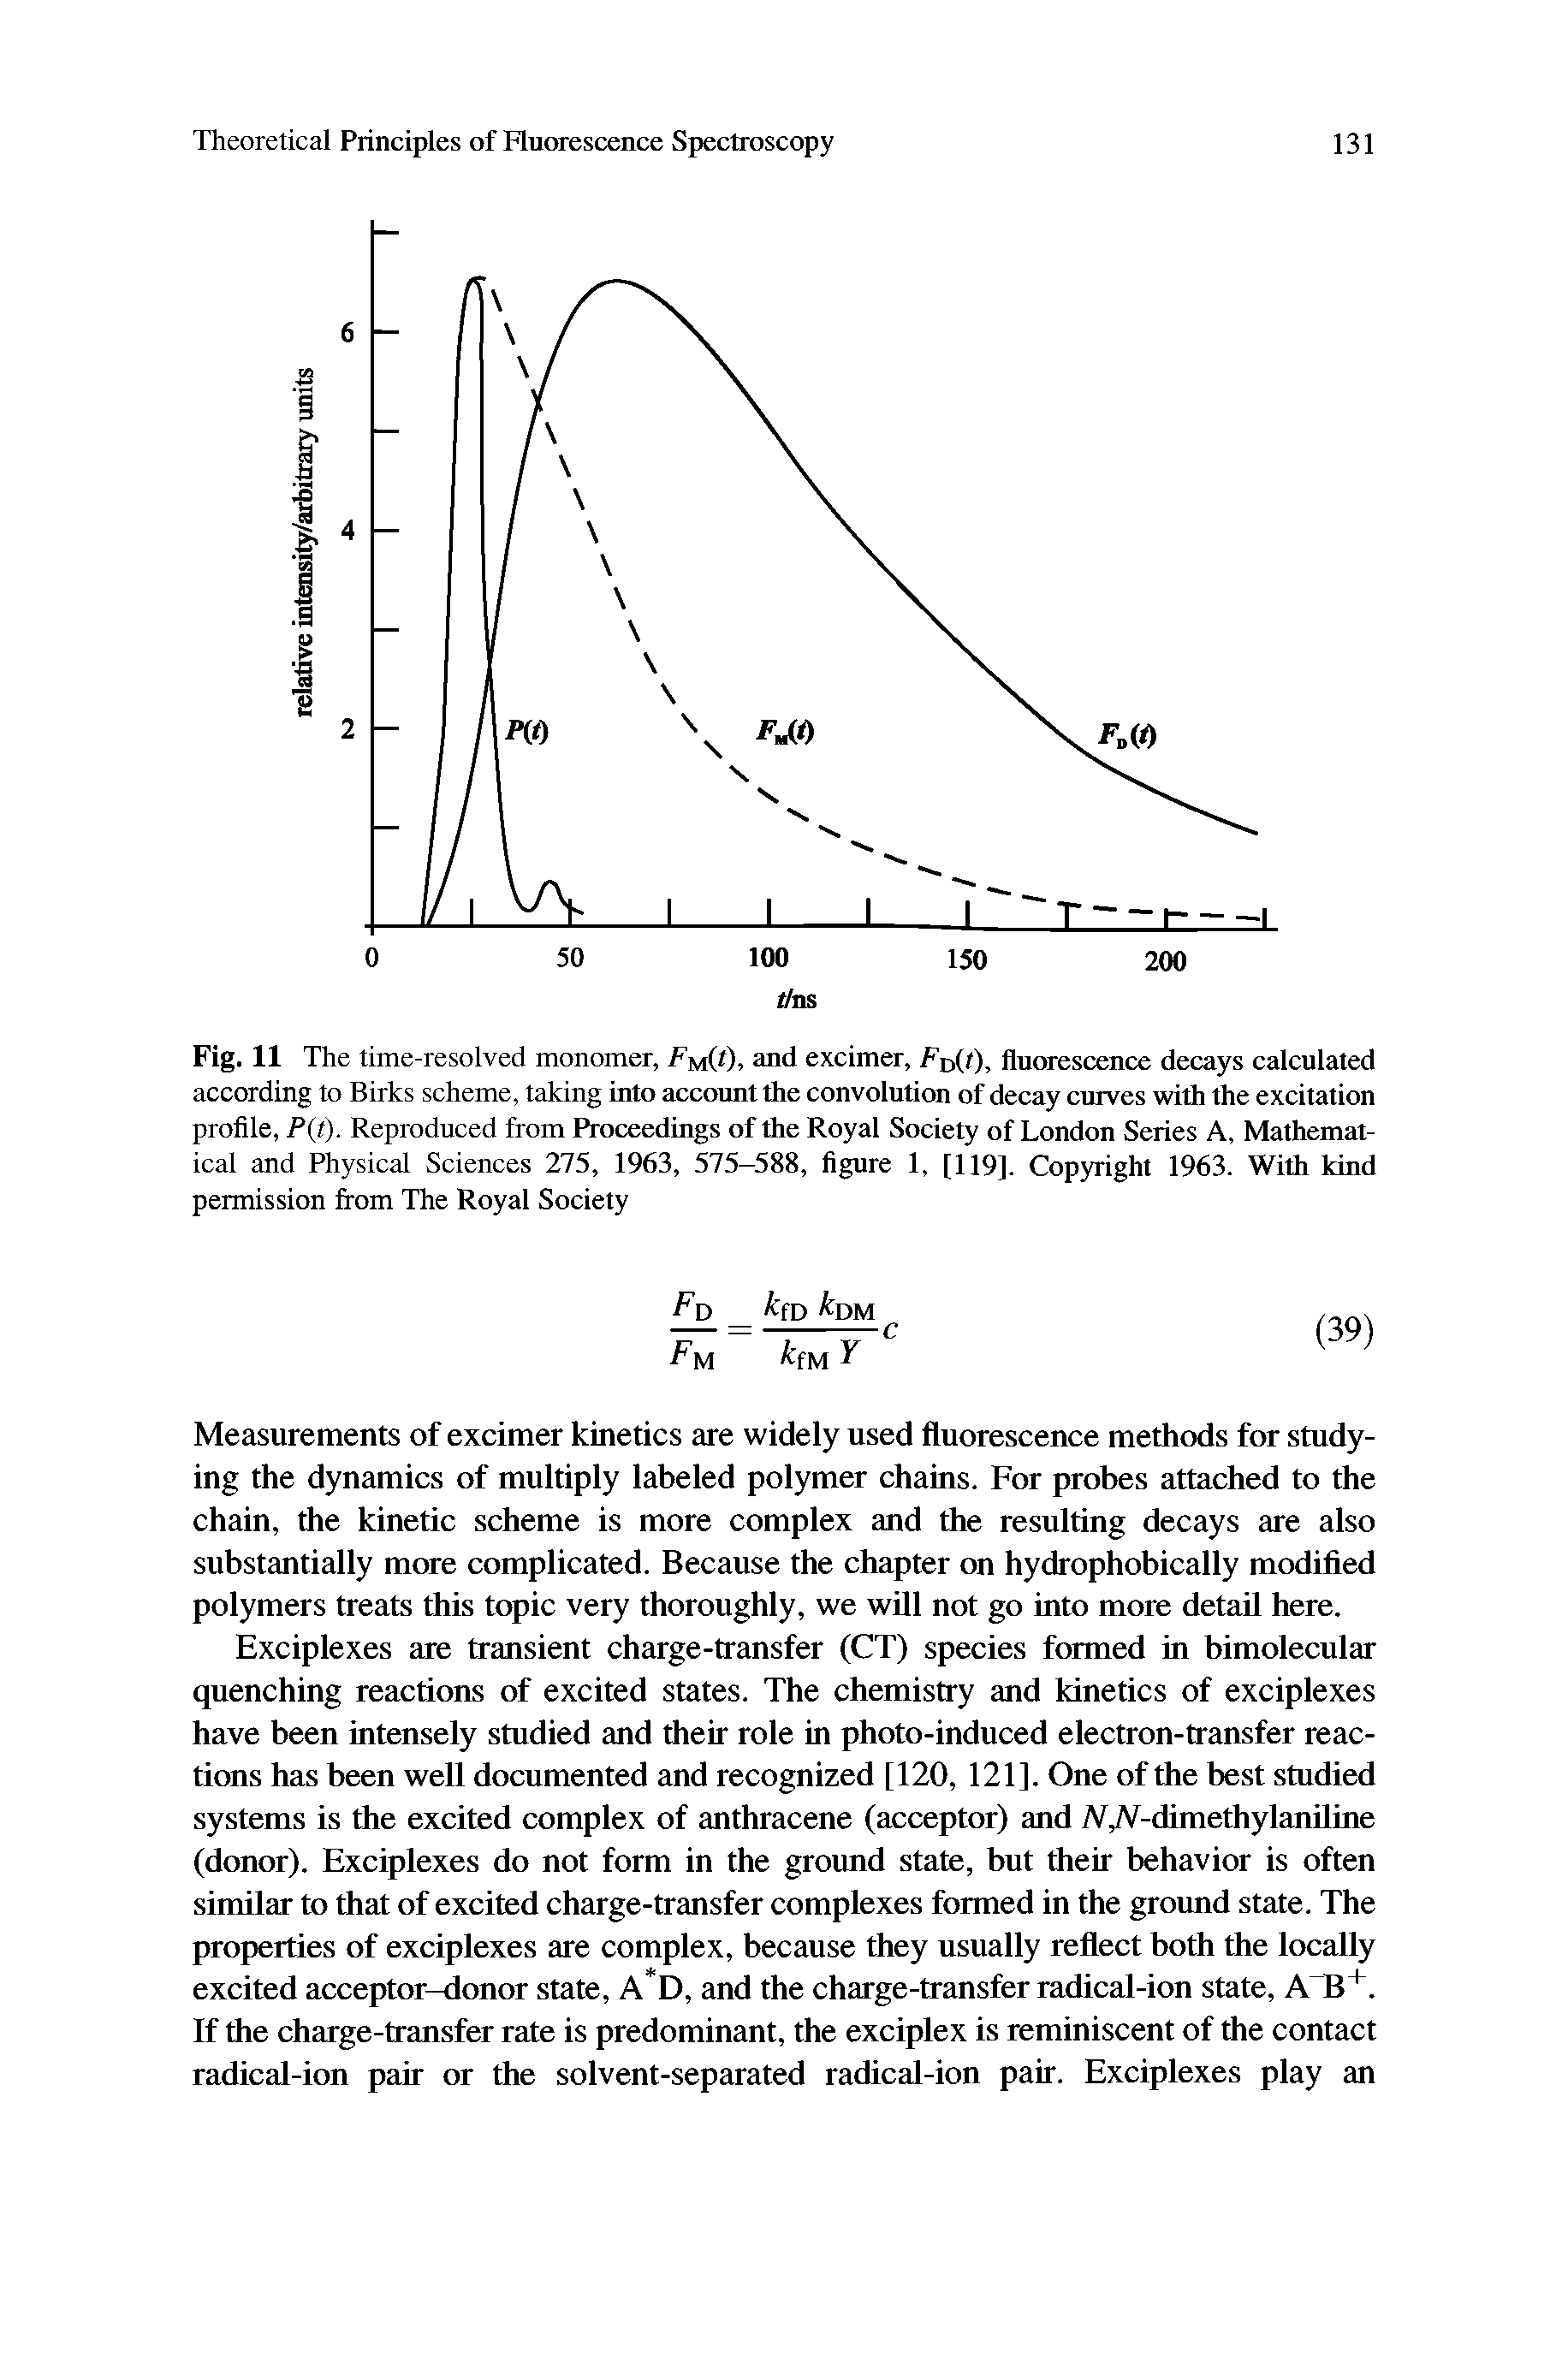 Fig. 11 The time-resolved monomer, FmW. and excimer, Fd(0, fluorescence decays calculated according to Birks scheme, taking into account the convolution of decay curves with the excitation profile, P t). Reproduced from Proceedings of the Royal Society of London Series A, Mathematical and Physical Sciences 275, 1963, 575-588, figure 1, [119]. Copyright 1963. With kind permission from The Royal Society...